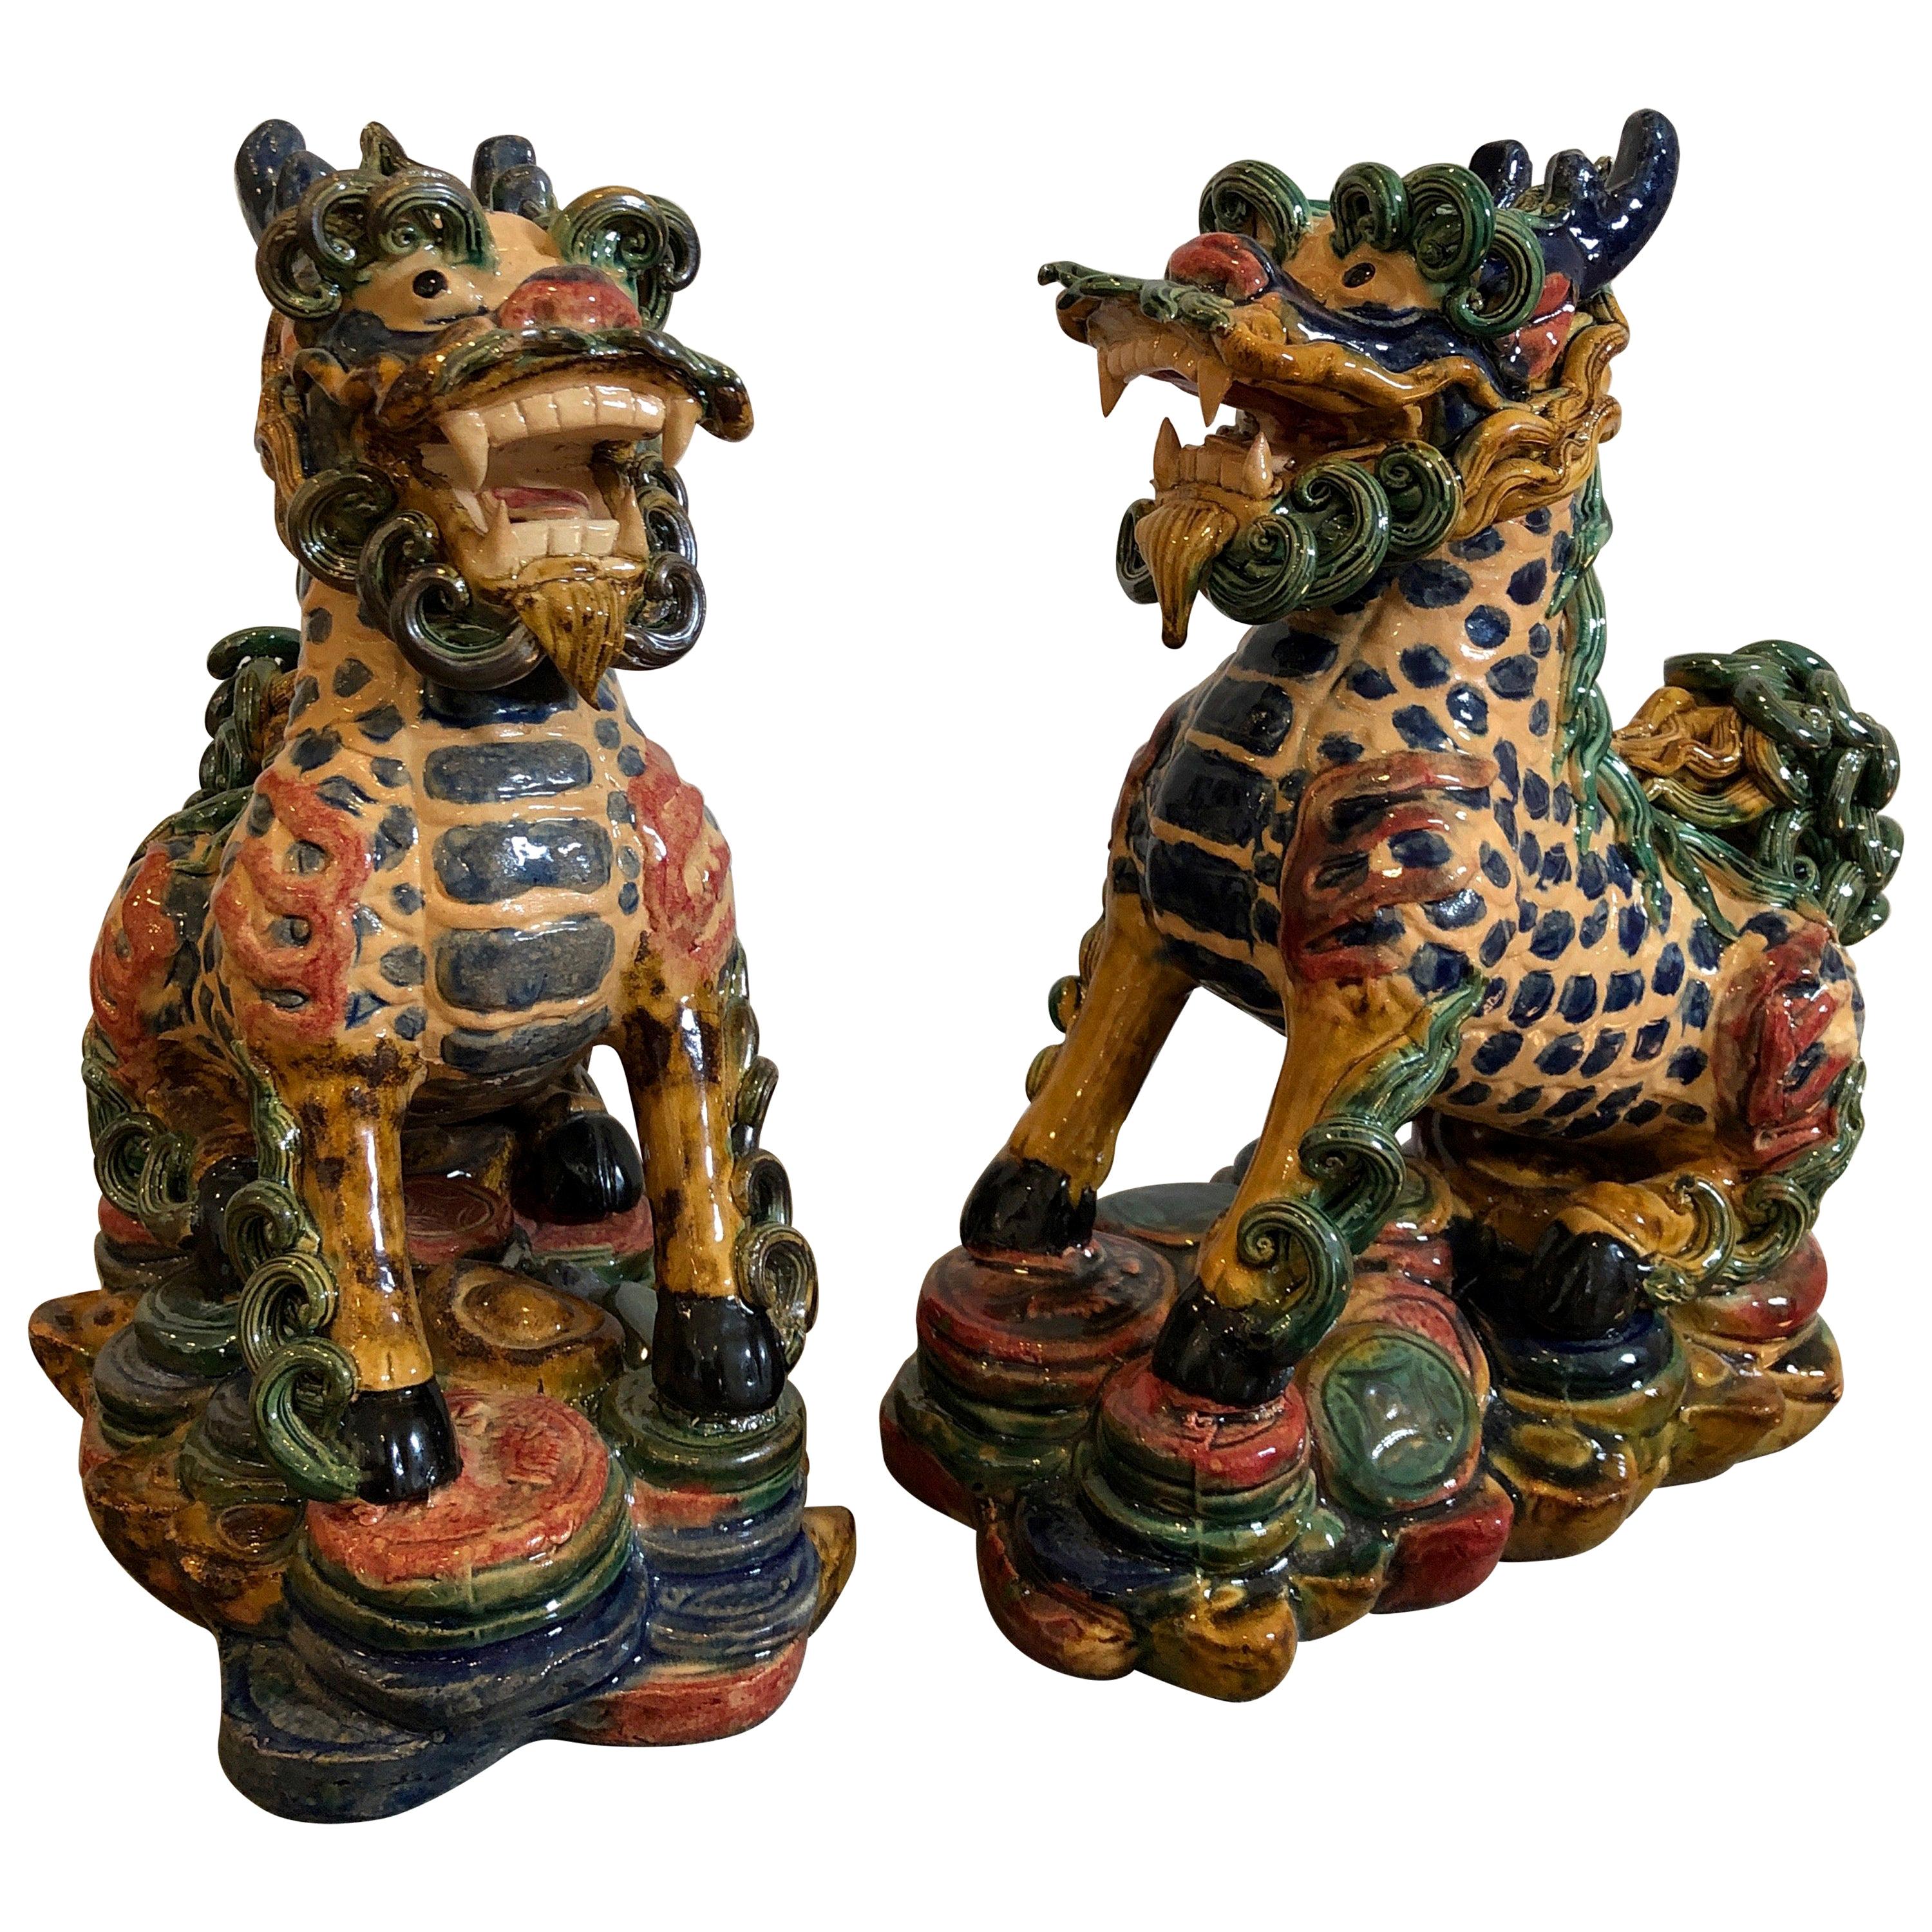 Exquisite Pair of Glazed Porcelain Foo Dogs